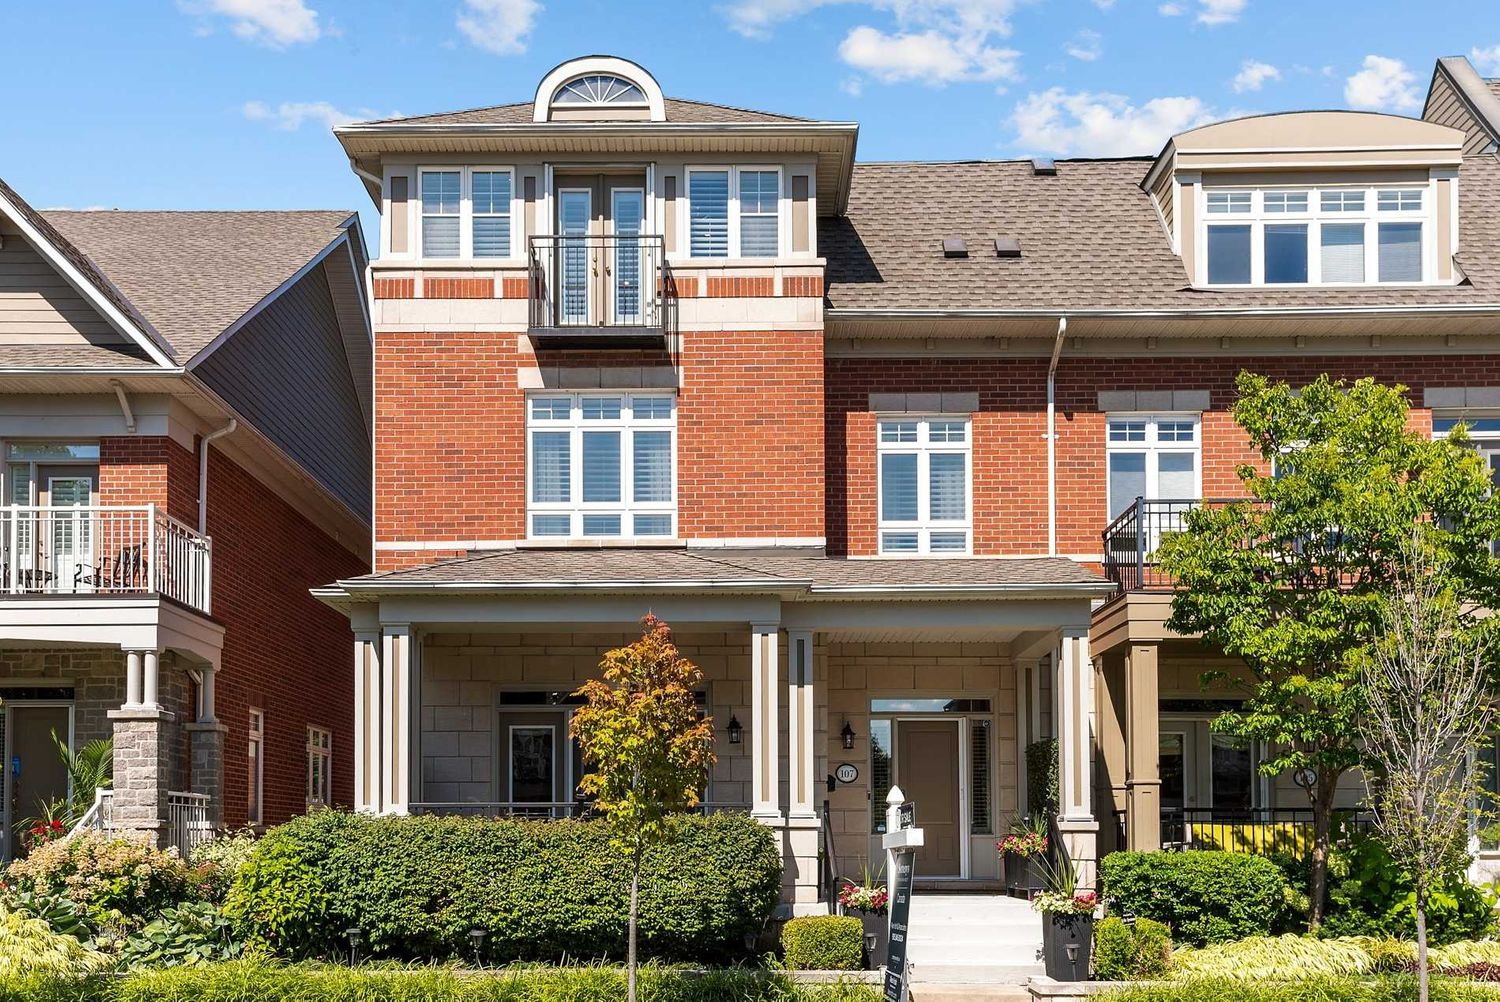 97-159 St Lawrence Drive. St Lawrence Drive Townhomes is located in  Mississauga, Toronto - image #2 of 2